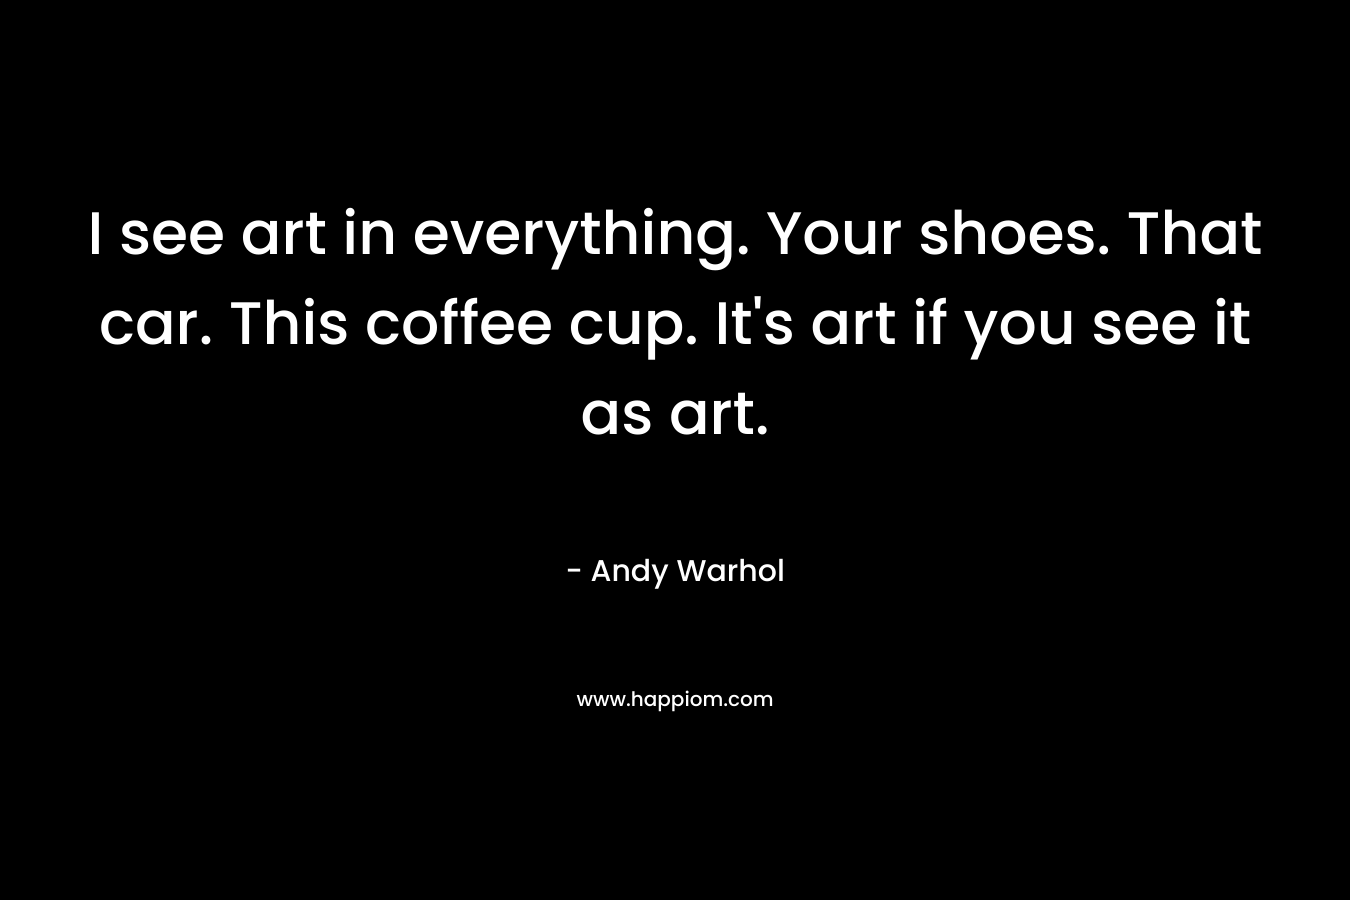 I see art in everything. Your shoes. That car. This coffee cup. It's art if you see it as art.